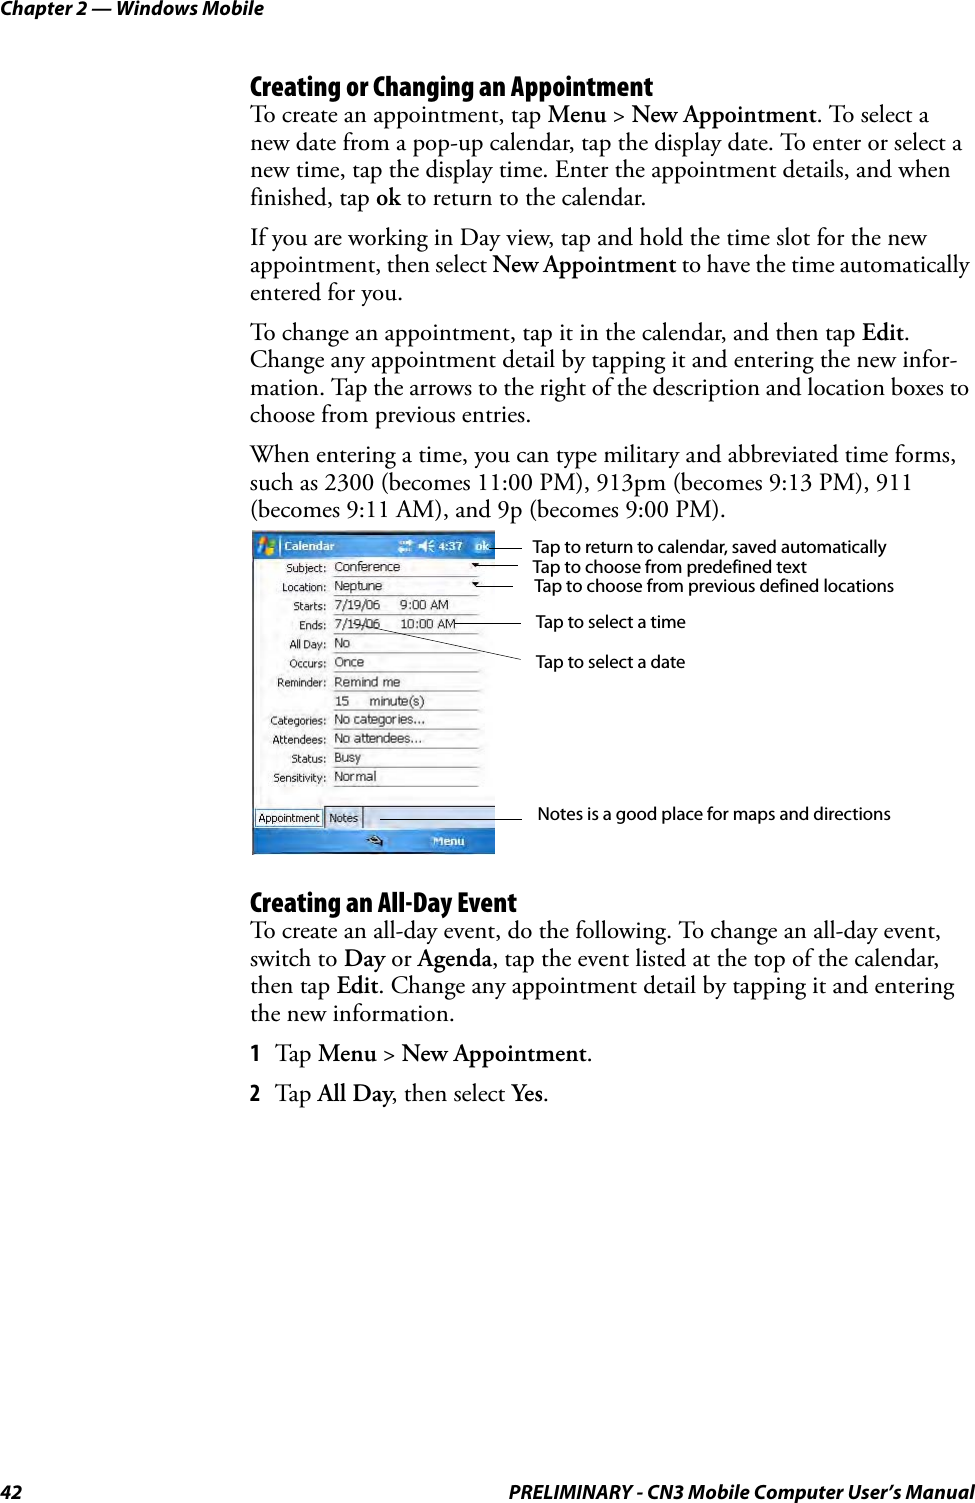 Chapter 2 — Windows Mobile42 PRELIMINARY - CN3 Mobile Computer User’s ManualCreating or Changing an AppointmentTo create an appointment, tap Menu &gt; New Appointment. To select a new date from a pop-up calendar, tap the display date. To enter or select a new time, tap the display time. Enter the appointment details, and when finished, tap ok to return to the calendar.If you are working in Day view, tap and hold the time slot for the new appointment, then select New Appointment to have the time automatically entered for you.To change an appointment, tap it in the calendar, and then tap Edit. Change any appointment detail by tapping it and entering the new infor-mation. Tap the arrows to the right of the description and location boxes to choose from previous entries.When entering a time, you can type military and abbreviated time forms, such as 2300 (becomes 11:00 PM), 913pm (becomes 9:13 PM), 911 (becomes 9:11 AM), and 9p (becomes 9:00 PM).Creating an All-Day EventTo create an all-day event, do the following. To change an all-day event, switch to Day or Agenda, tap the event listed at the top of the calendar, then tap Edit. Change any appointment detail by tapping it and entering the new information.1Tap Menu &gt; New Appointment.2Tap All Day, then select Yes.Tap to return to calendar, saved automaticallyTap to choose from predefined textTap to choose from previous defined locationsTap to select a timeTap to select a dateNotes is a good place for maps and directions